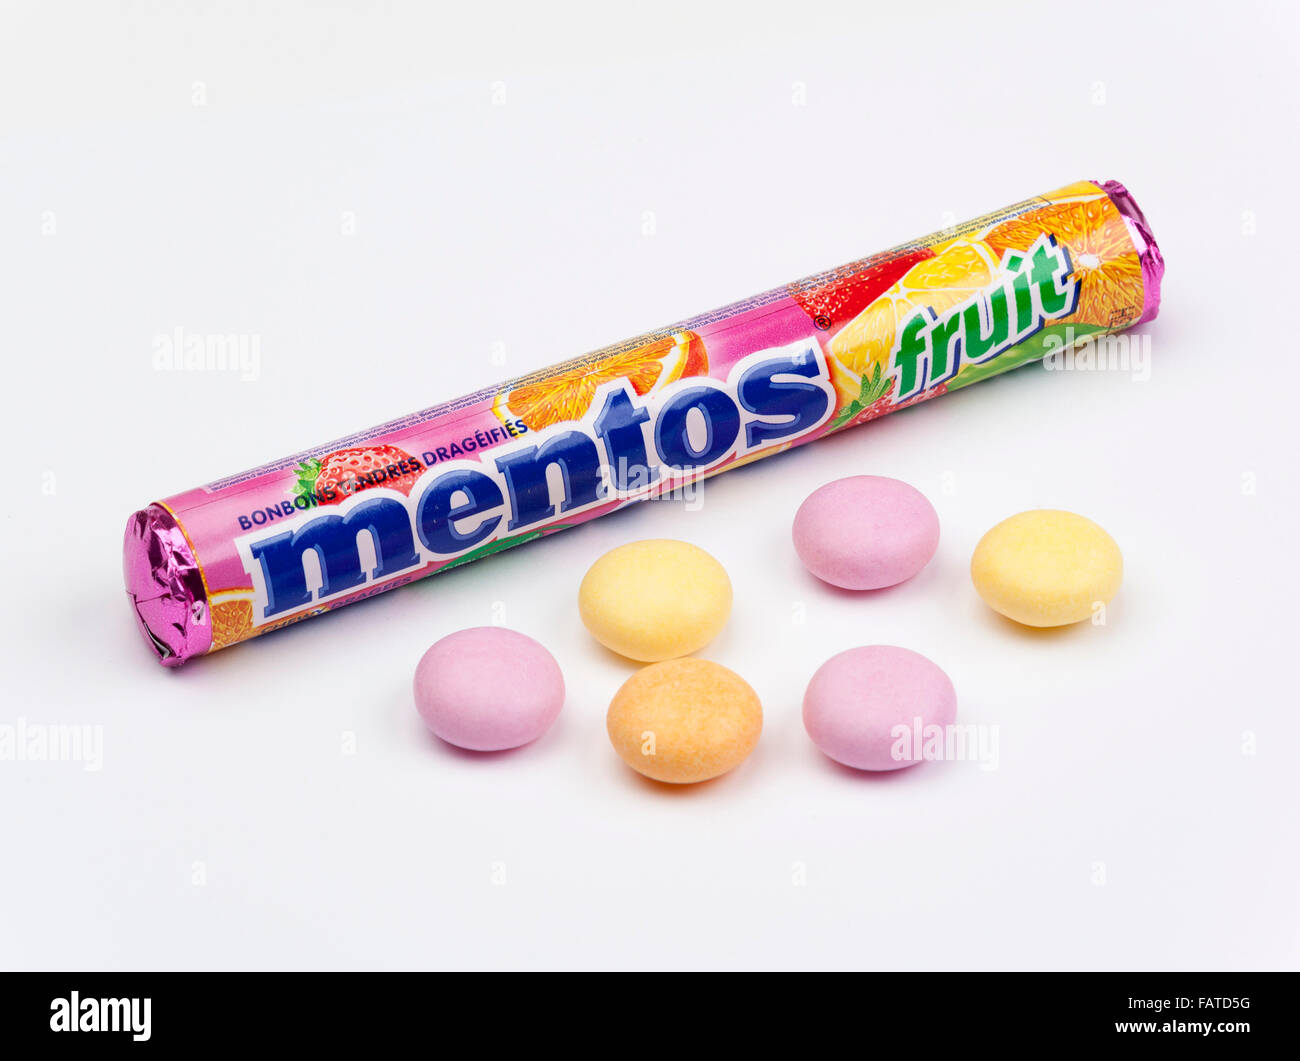 Mentos mints made by Perfetti Van Melle Stock Photo